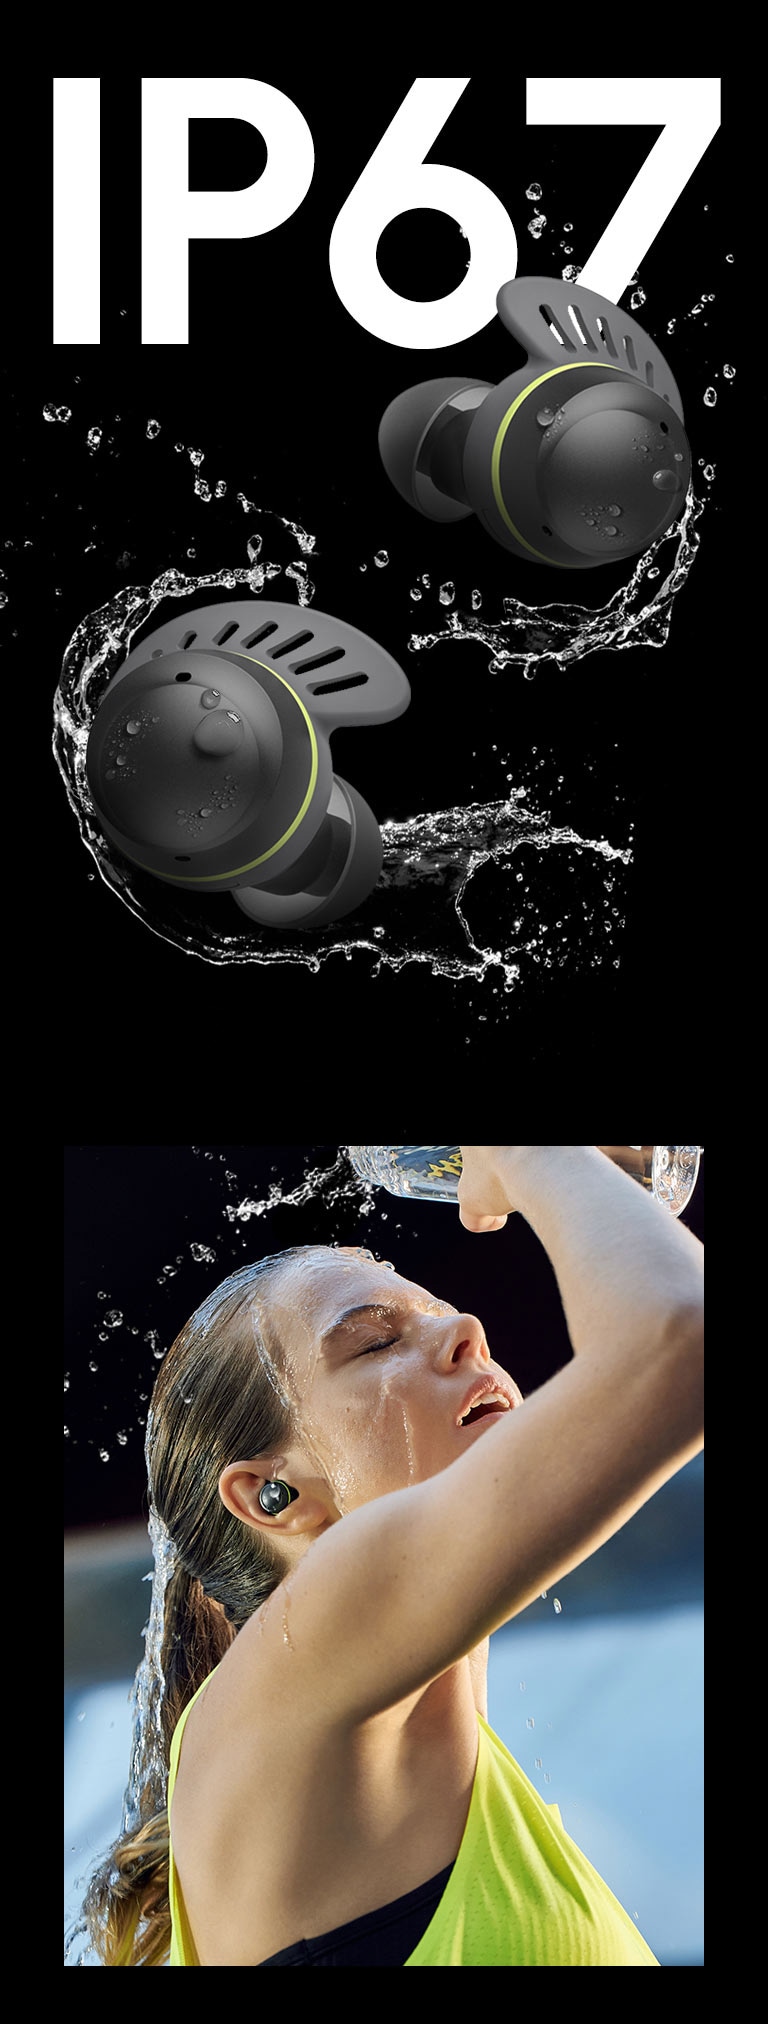 LG TONE-TF7Q TONE Free fit earbuds in front of text saying IP67. The earbuds are surrounded by water and water droplets.  A woman with her hair tied up is shown on the left, wearing a TONE Free fit product, pouring water on her face, and a man's hand washing the TONE Free fit earbuds with water is shown on the right.